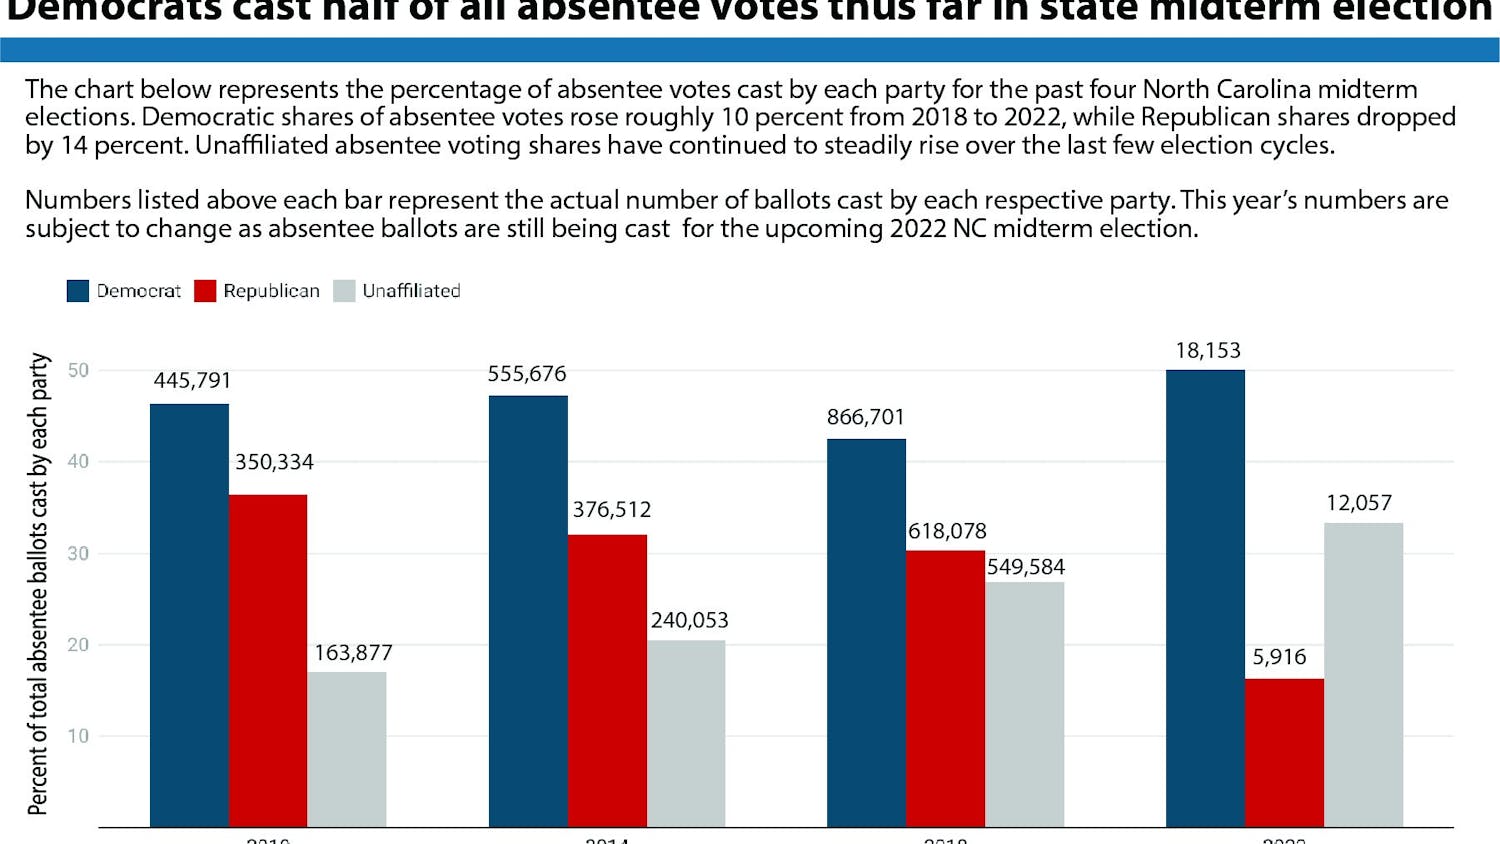 Democrats cast half of all absentee ballots thus far in state midterm election